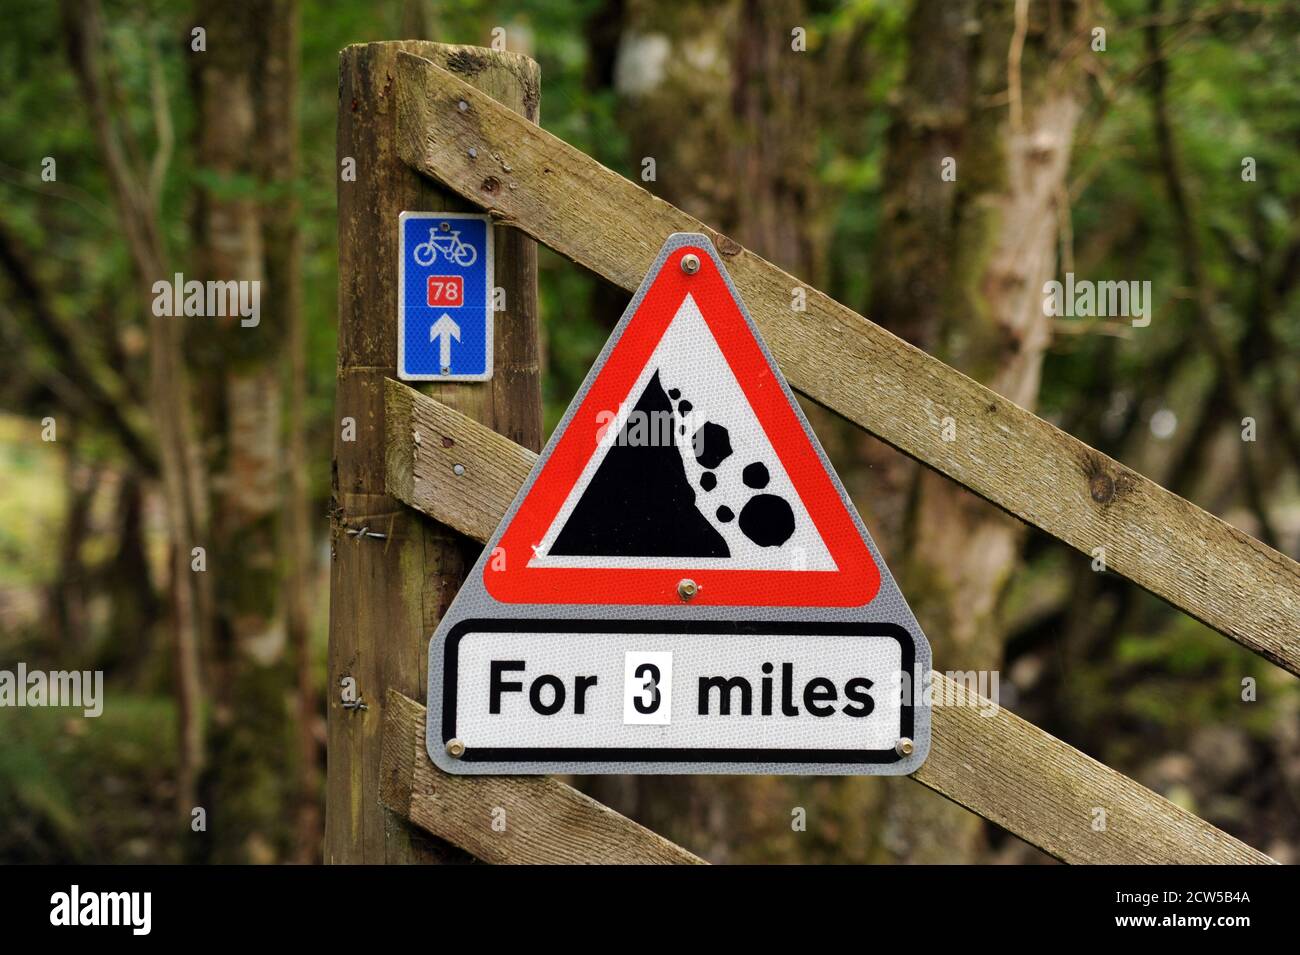 NATIONAL CYCLE ROUTE SIGN WITH FALLING ROCKS SIGN IN SCOTLAND NEAR FORT AUGUSTUS AND INVERNESS RE CYCLING HOLIDAYS FITNESS ETC UK Stock Photo